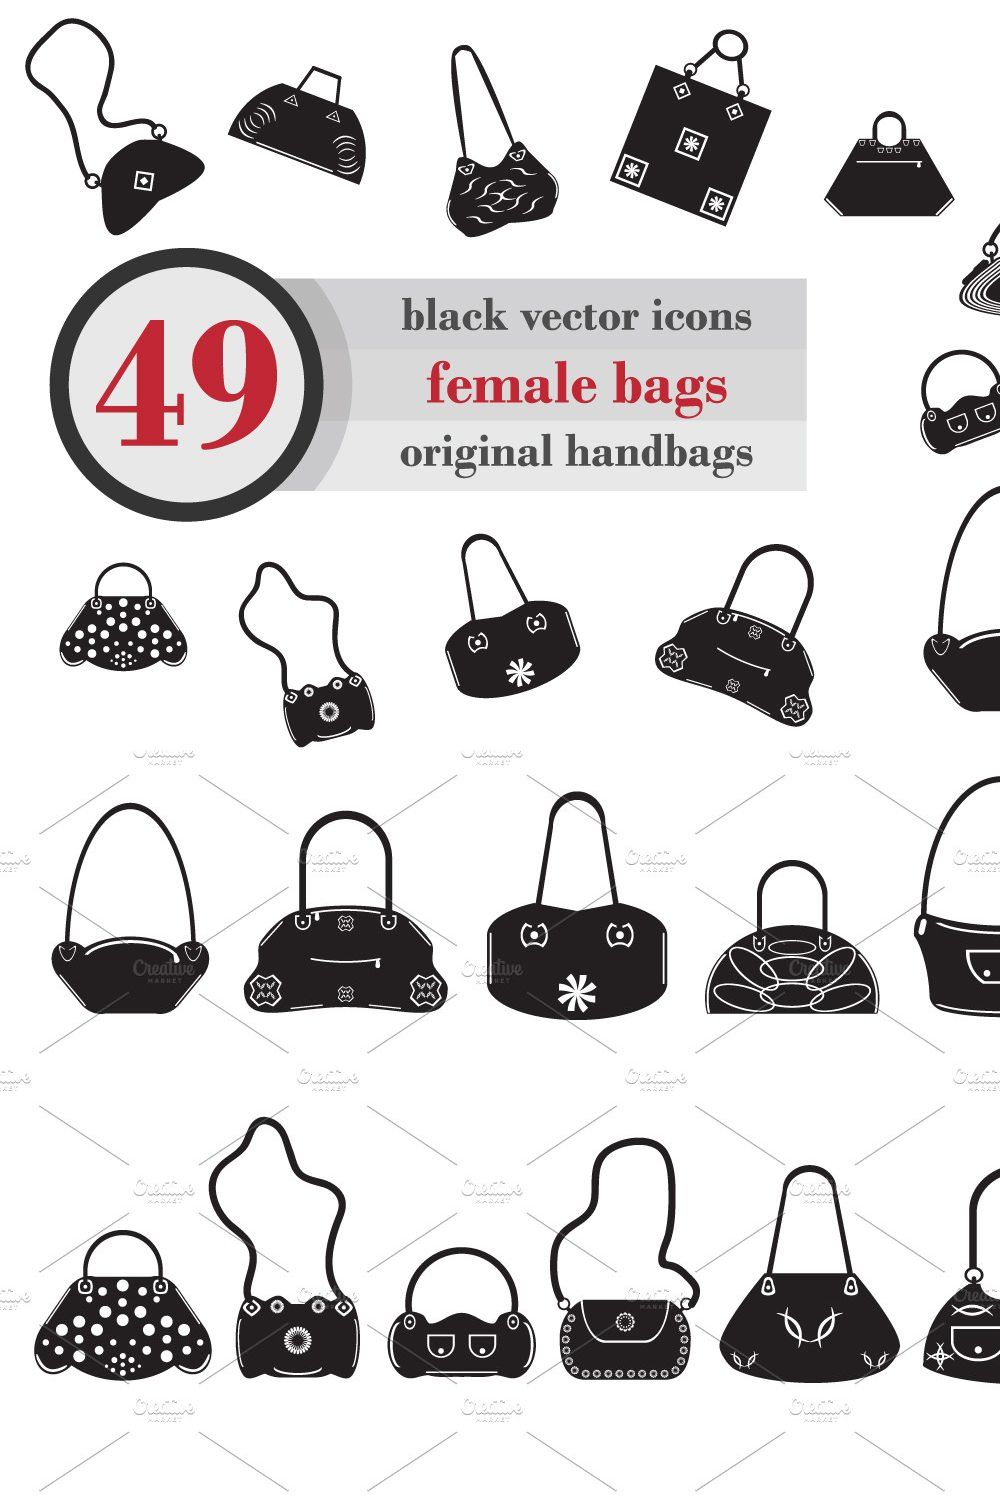 Black icons female bags pinterest preview image.